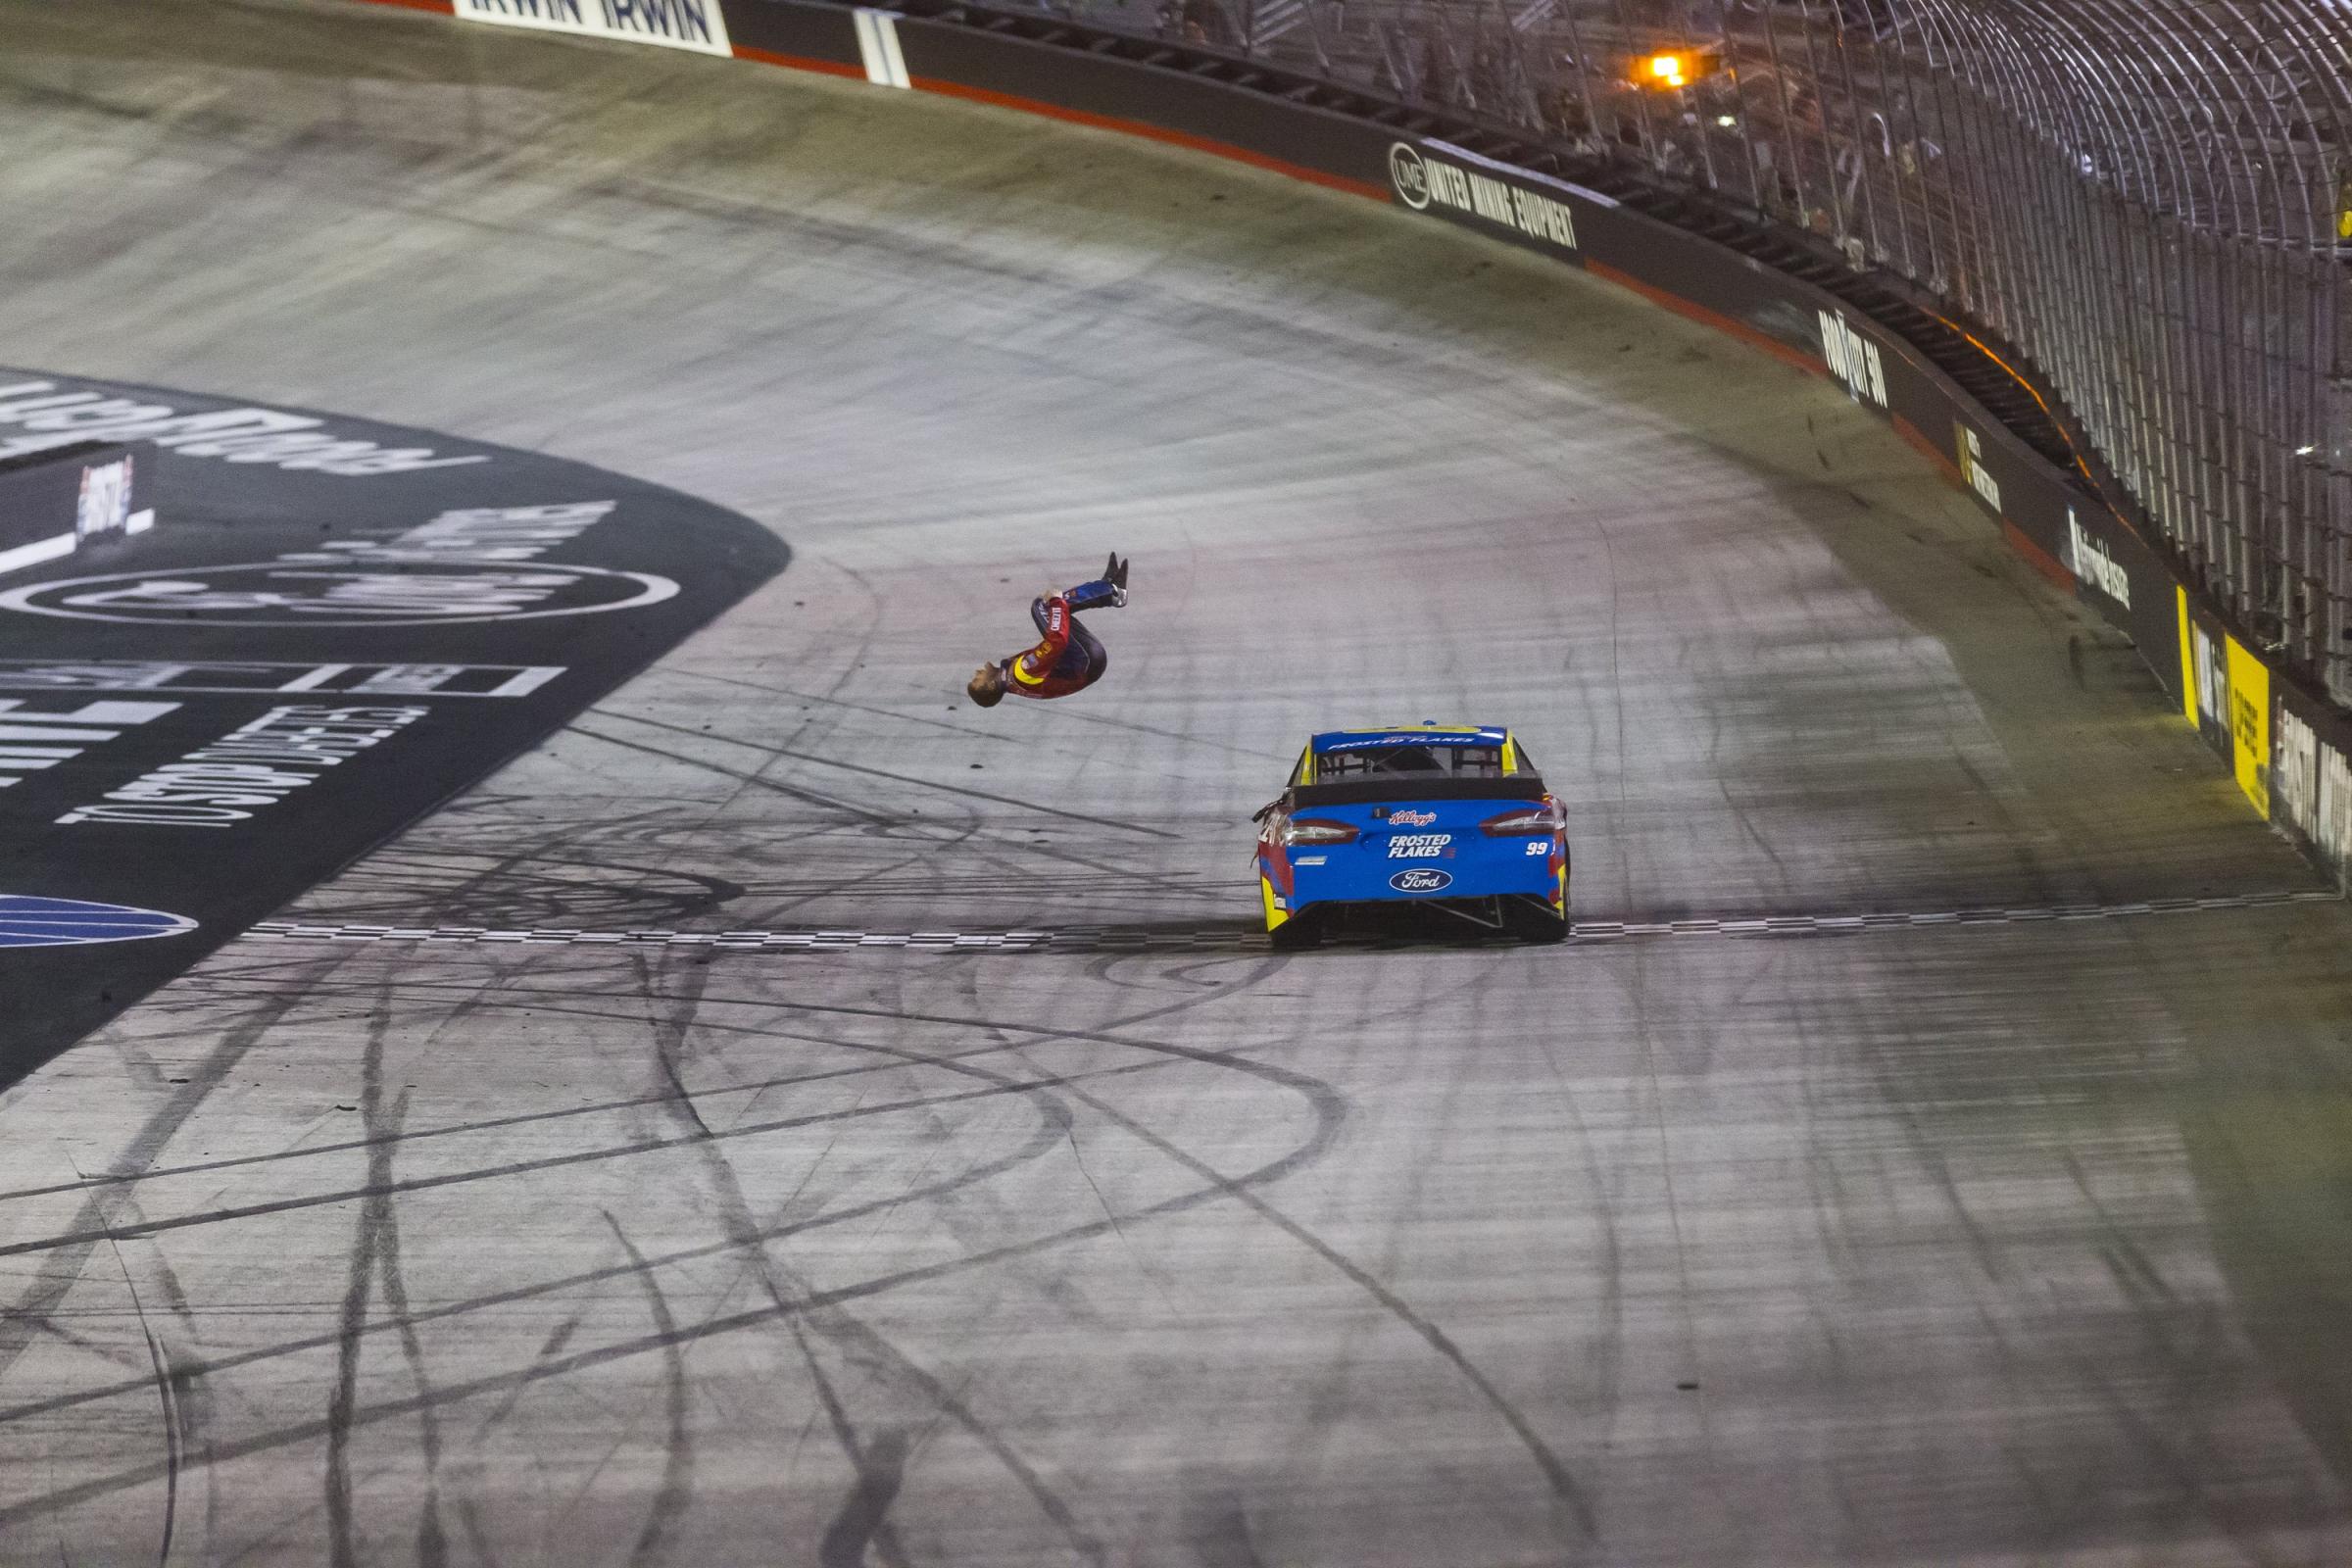 Driver Carl Edwards does a back flip off of the Roush Fenway Racing #99 Ford Fusion after winning the Sprint Cup series Food City 500 at Bristol Motor Speedway in Bristol, Tenn.